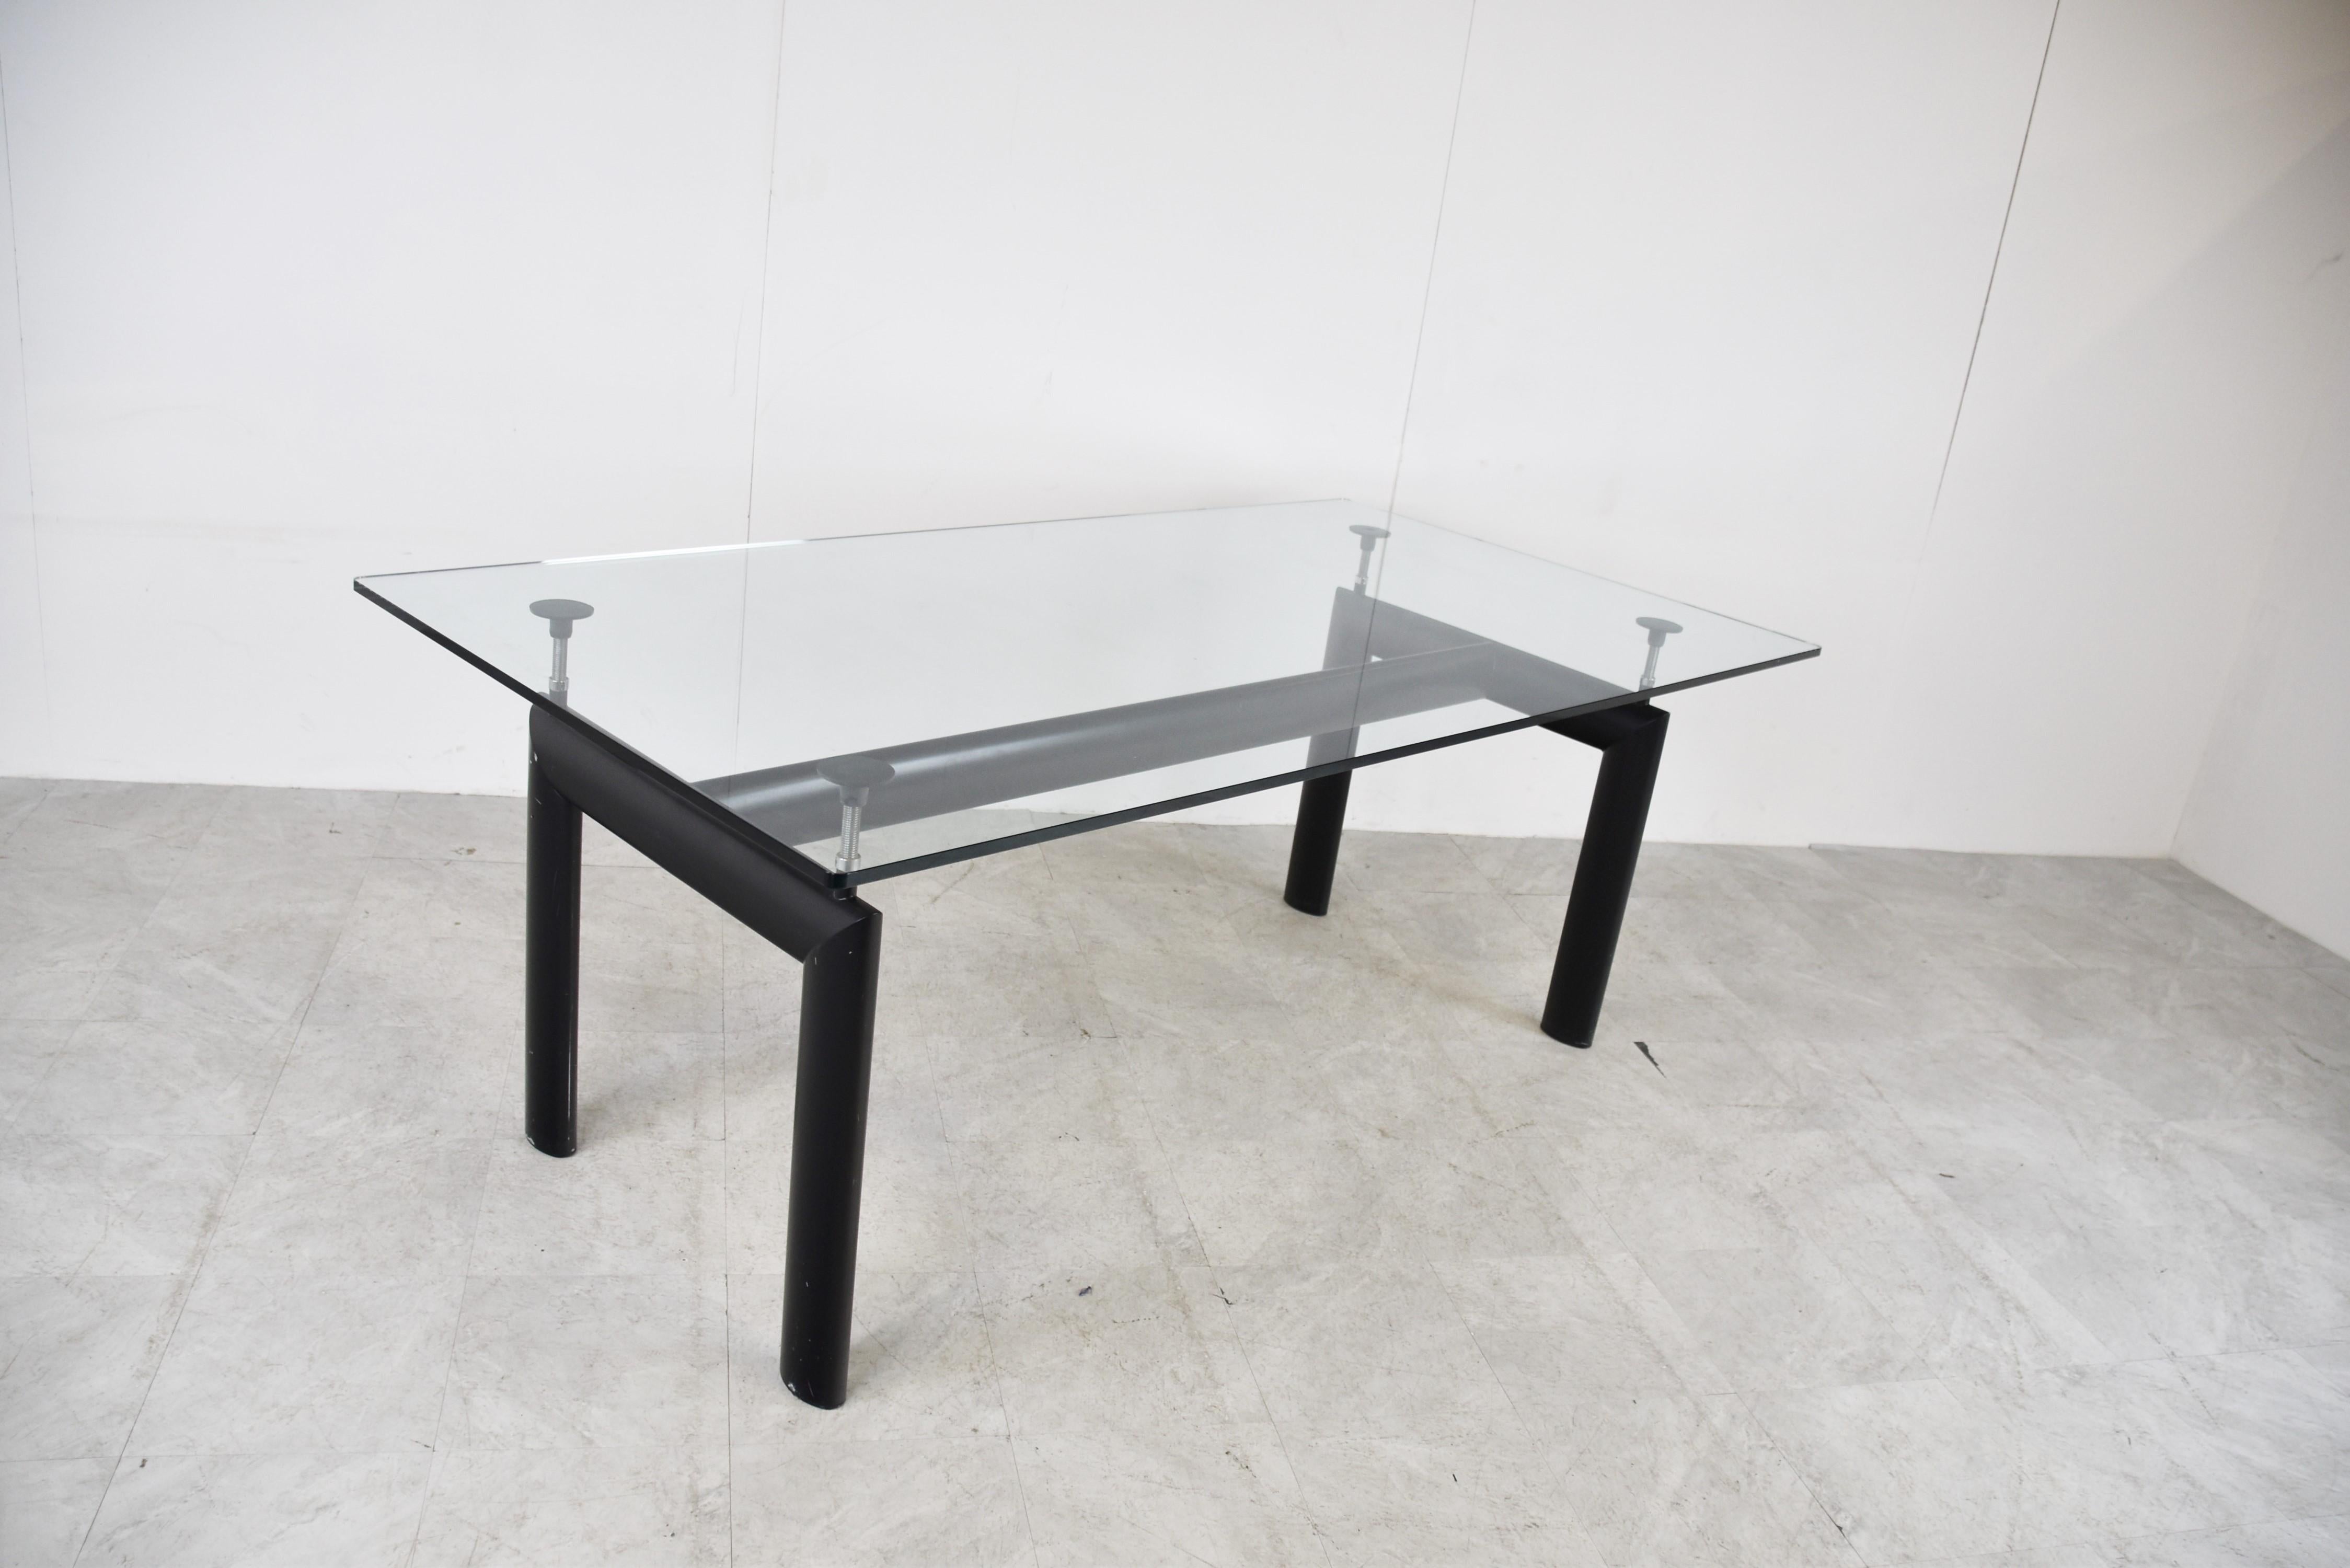 Dining table designed by Le Corbusier, Pierre Jeanneret, Charlotte Perriand originally in 1928 for the Salon d’Automne in Paris and relaunched in 1974 by Cassina.

It features a black aluminum base with 4 adjustable supports which make the table top